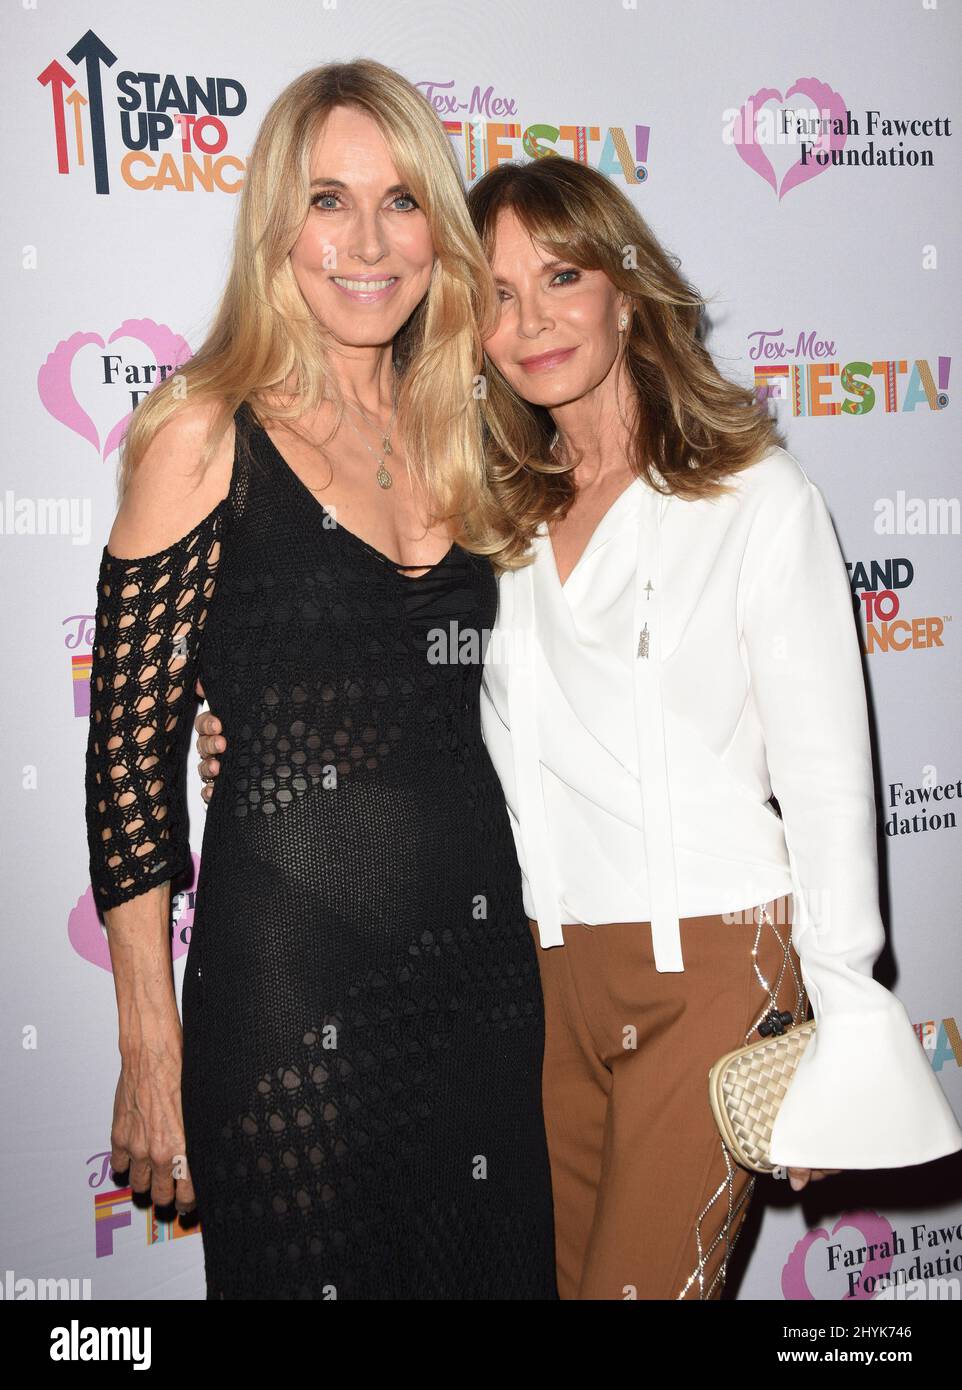 Alana Stewart and Jaclyn Smith at The Farrah Fawcett Foundation's Tex-Mex Fiesta held at the Wallis Annenberg Center for the Performing Arts on September 6, 2019 in Beverly Hills, USA. Stock Photo